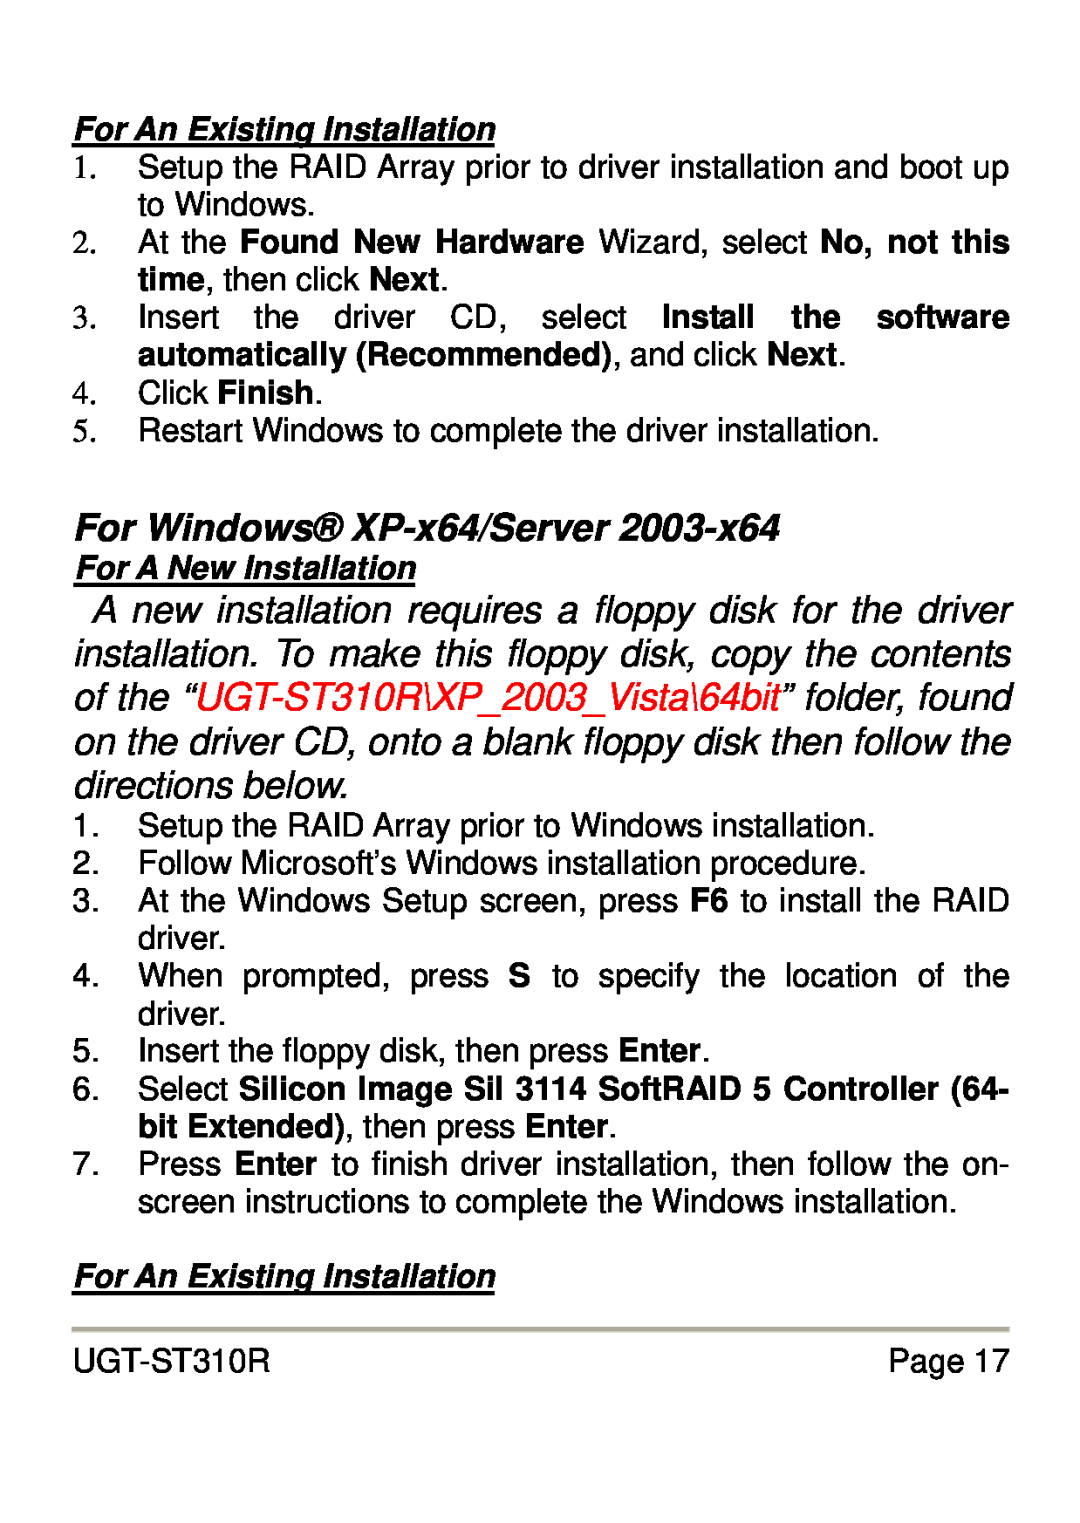 Vantec UGT-ST310R user manual For Windows XP-x64/Server, For An Existing Installation, For A New Installation 